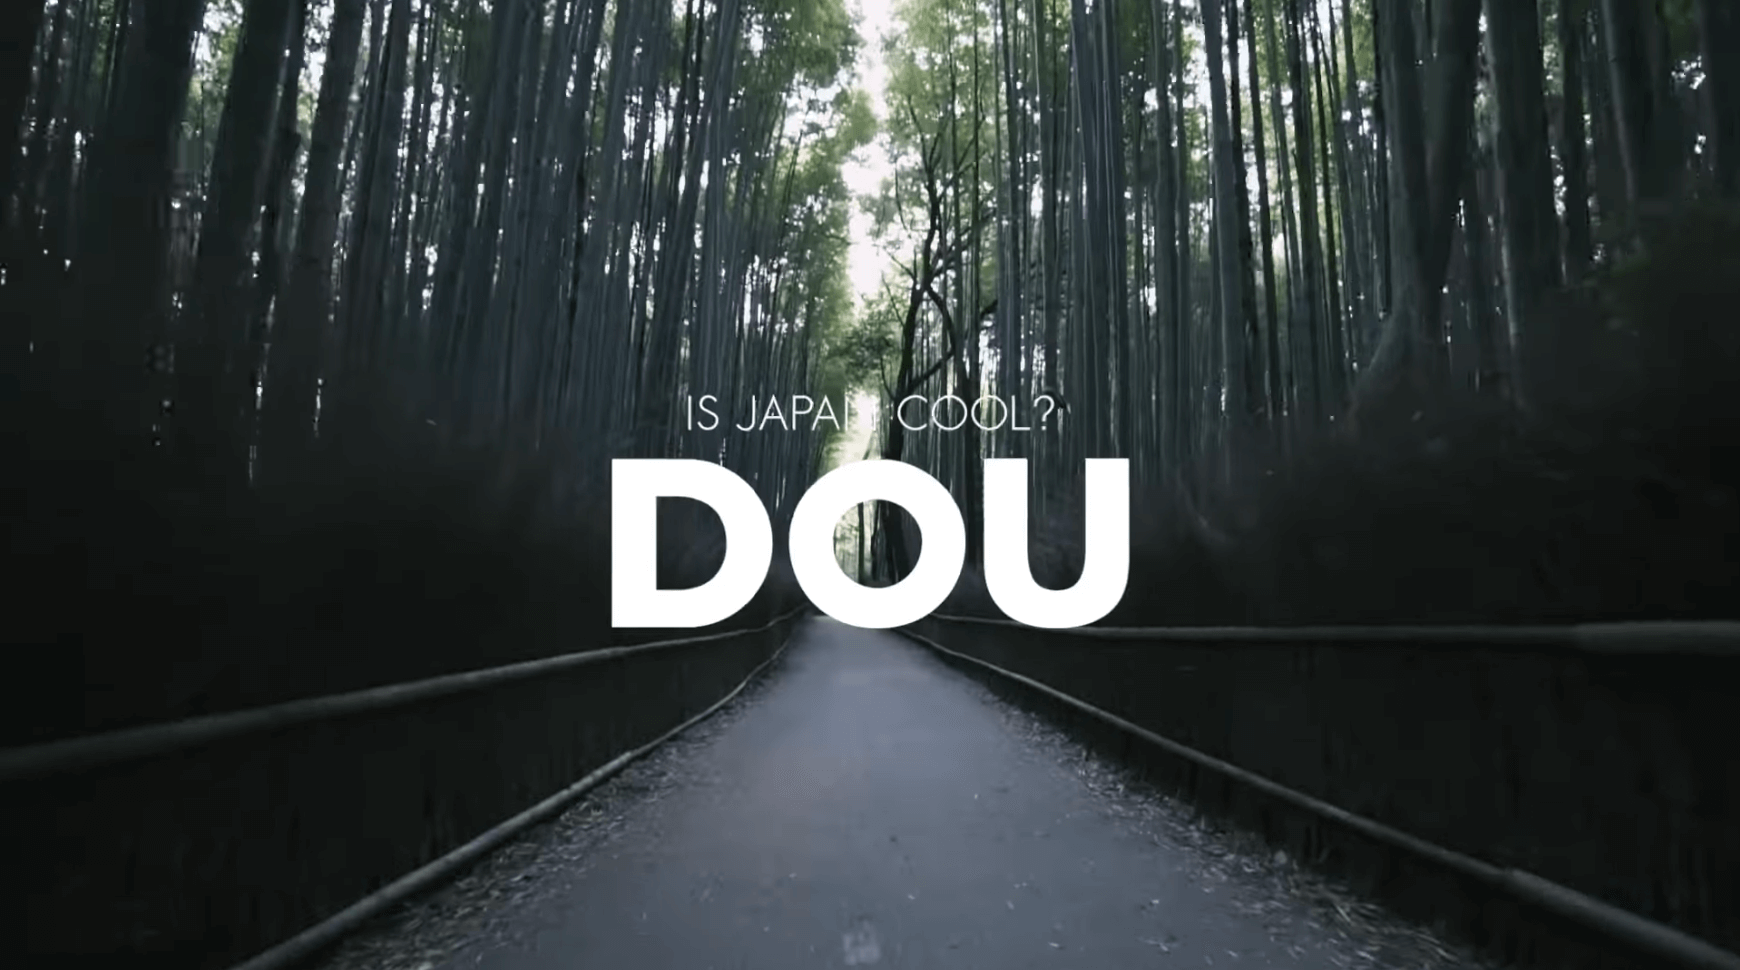 IS JAPAN COOL? DOU - 道 （THE TANGIBLE MANNER）